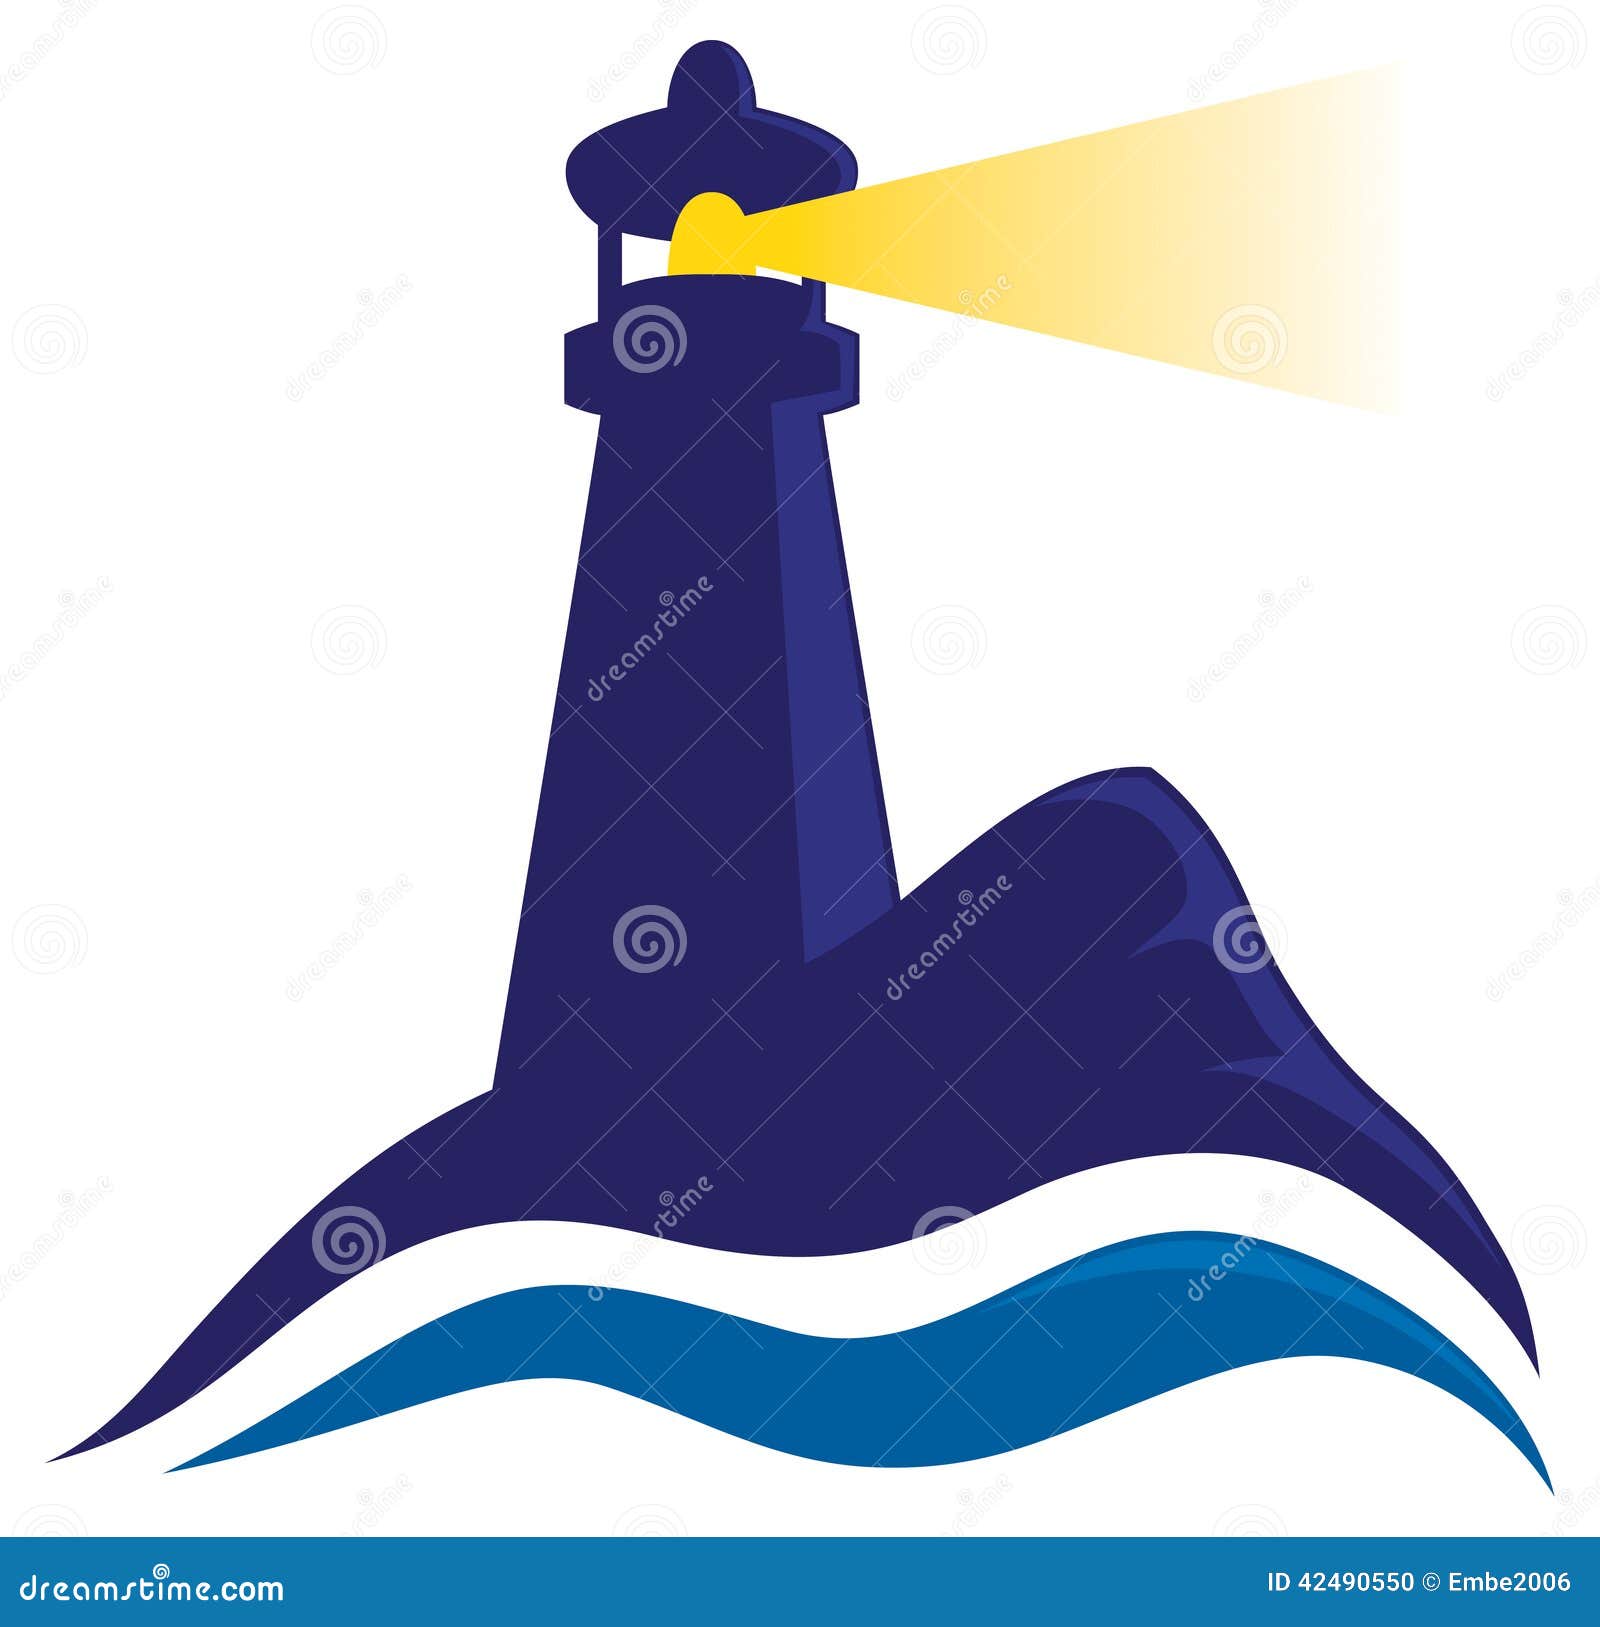 lighthouse clipart free download - photo #36